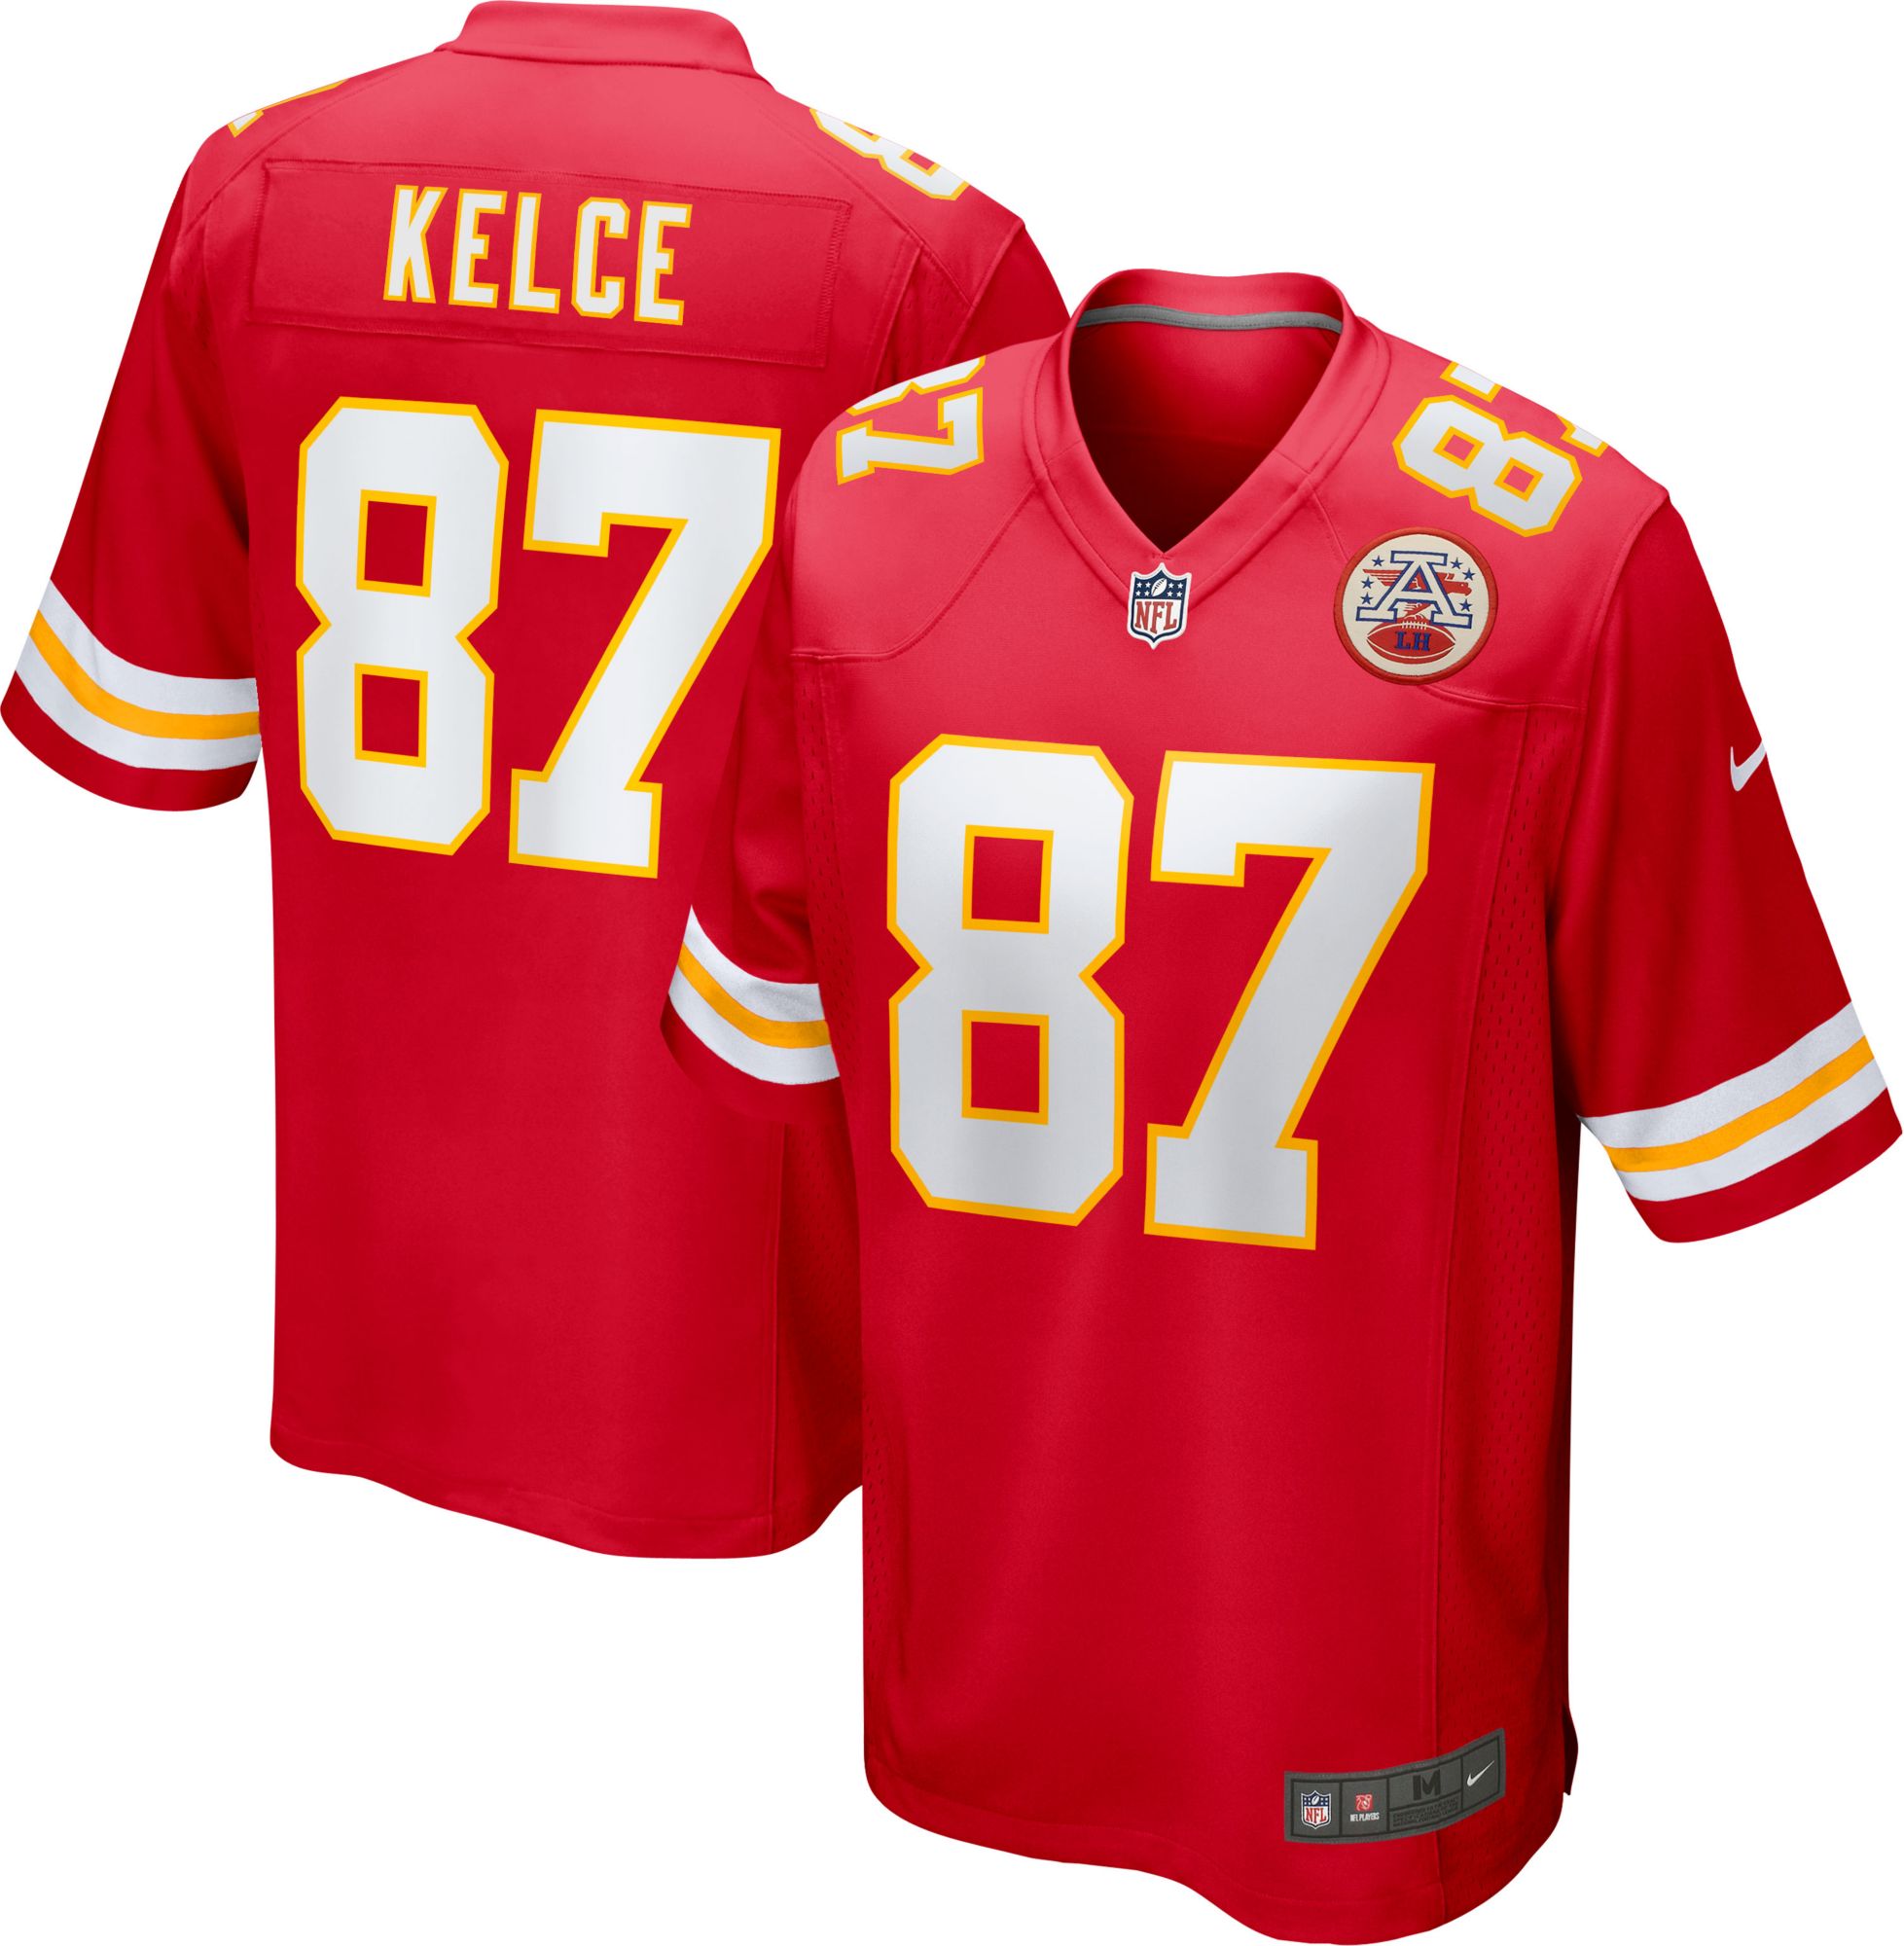 : Patrick Mahomes Jersey #15 Kansas City Custom Stitched Red  Football Various Sizes New No Brand/Logos Size 3XL : Everything Else